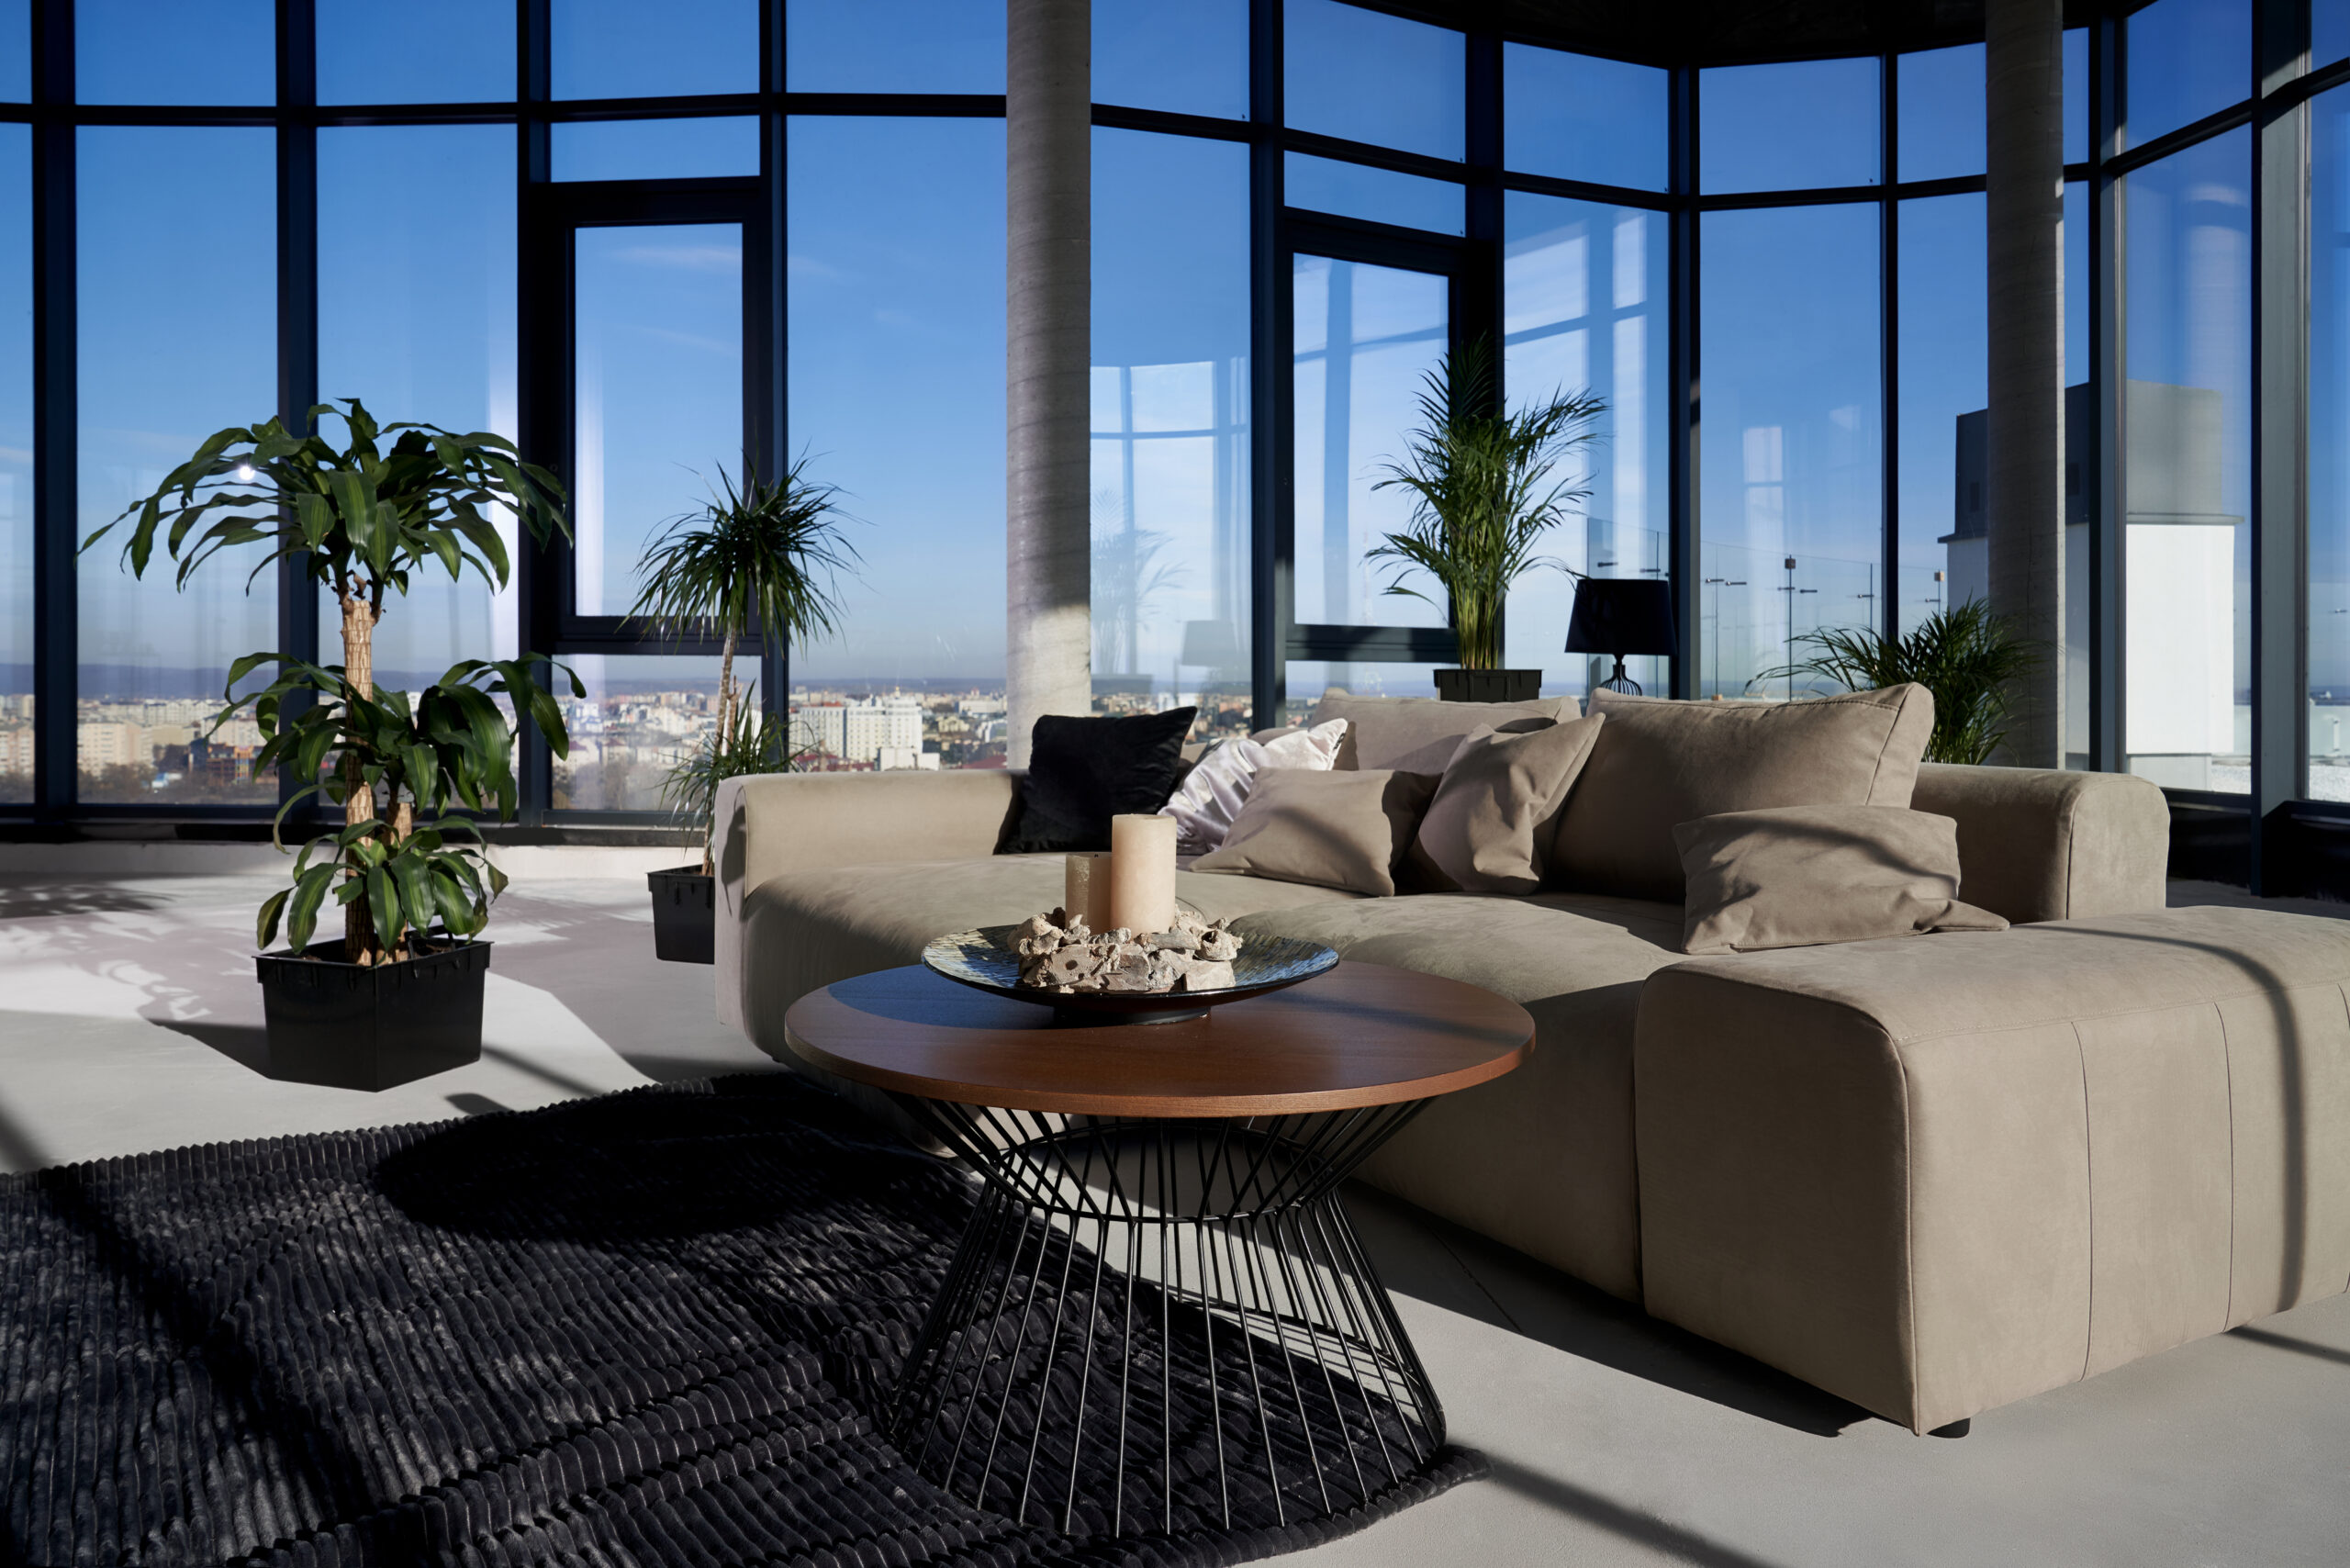 Front view of fashionable interior spacious room with large panoramic window with incredible view on city and cozy grey sofa with pillows and green flowerpots. Concept of modern interior.